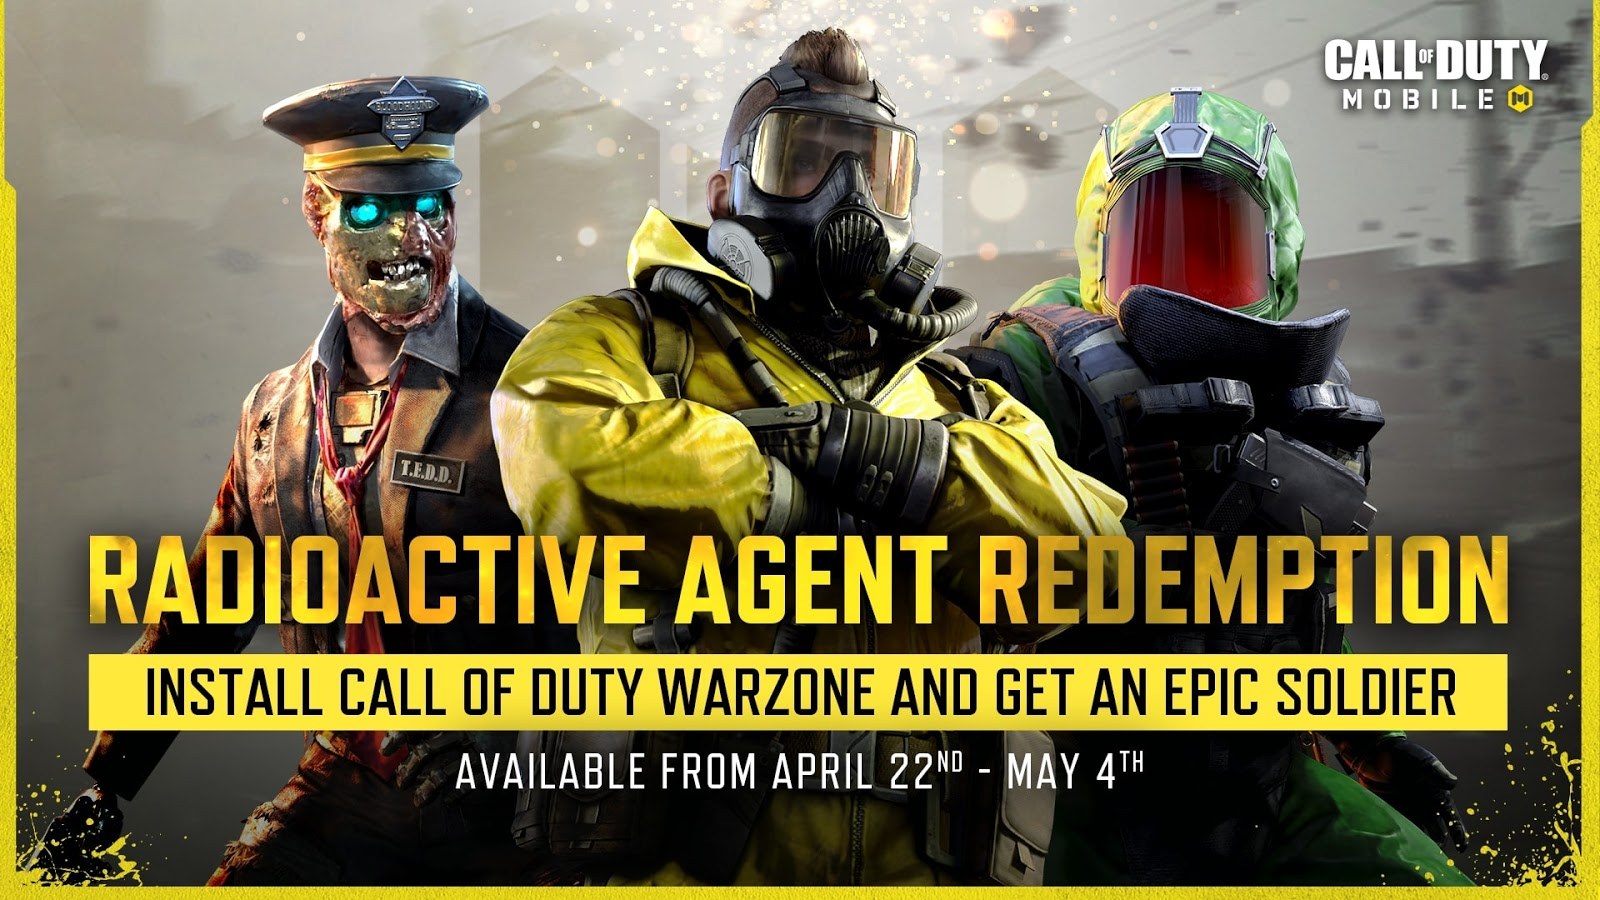 Call of Duty: Mobile Season 3 Introduces Night Mode 2.0, Radioactive Agent Redemption, And More